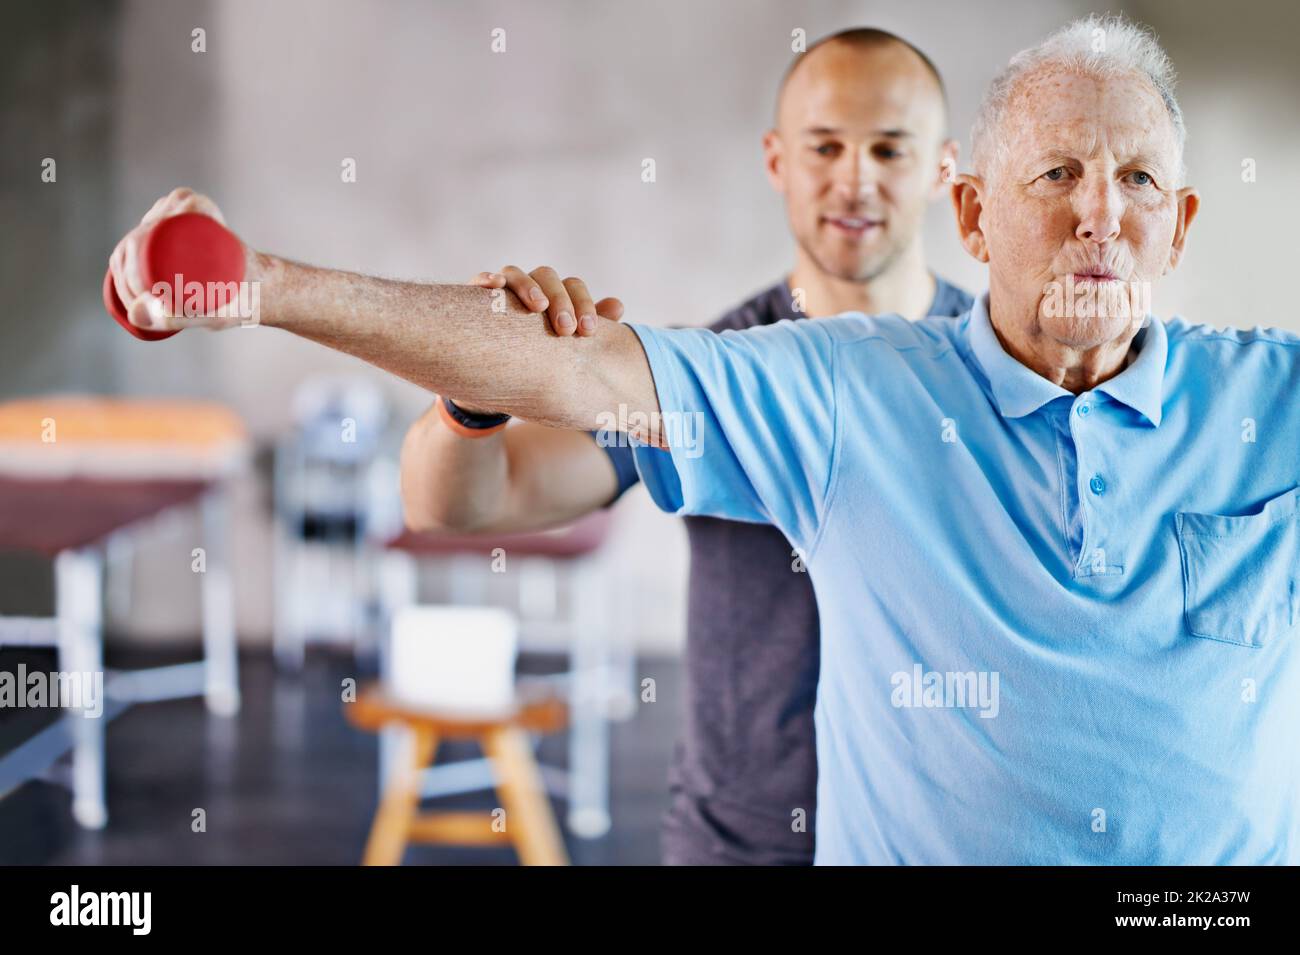 Physio one lift at a time. Shot of a physiotherapist helping a senior man with weights. Stock Photo